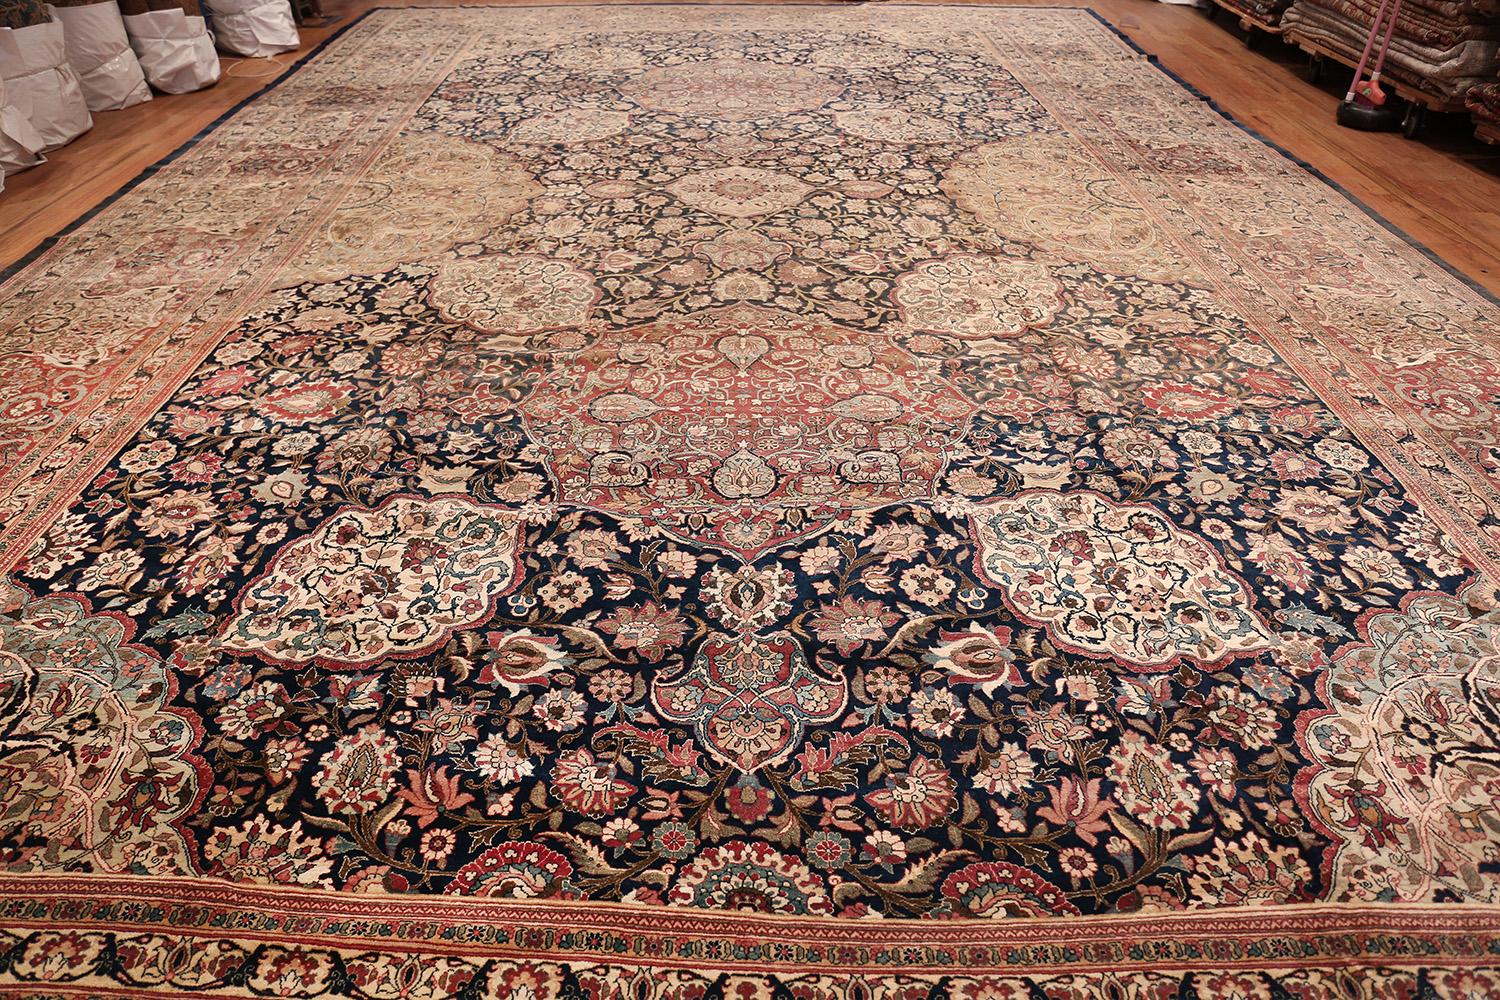 Beautiful Oversized Antique Tehran Carpet, Rug Type / Country of Origin: Antique Persian Rugs, Circa Date: 1900. Size: 14 ft 3 in x 22 ft 3 in (4.34 m x 6.78 m)

This captivating Tehran carpet has a look and feel that one would expect from many